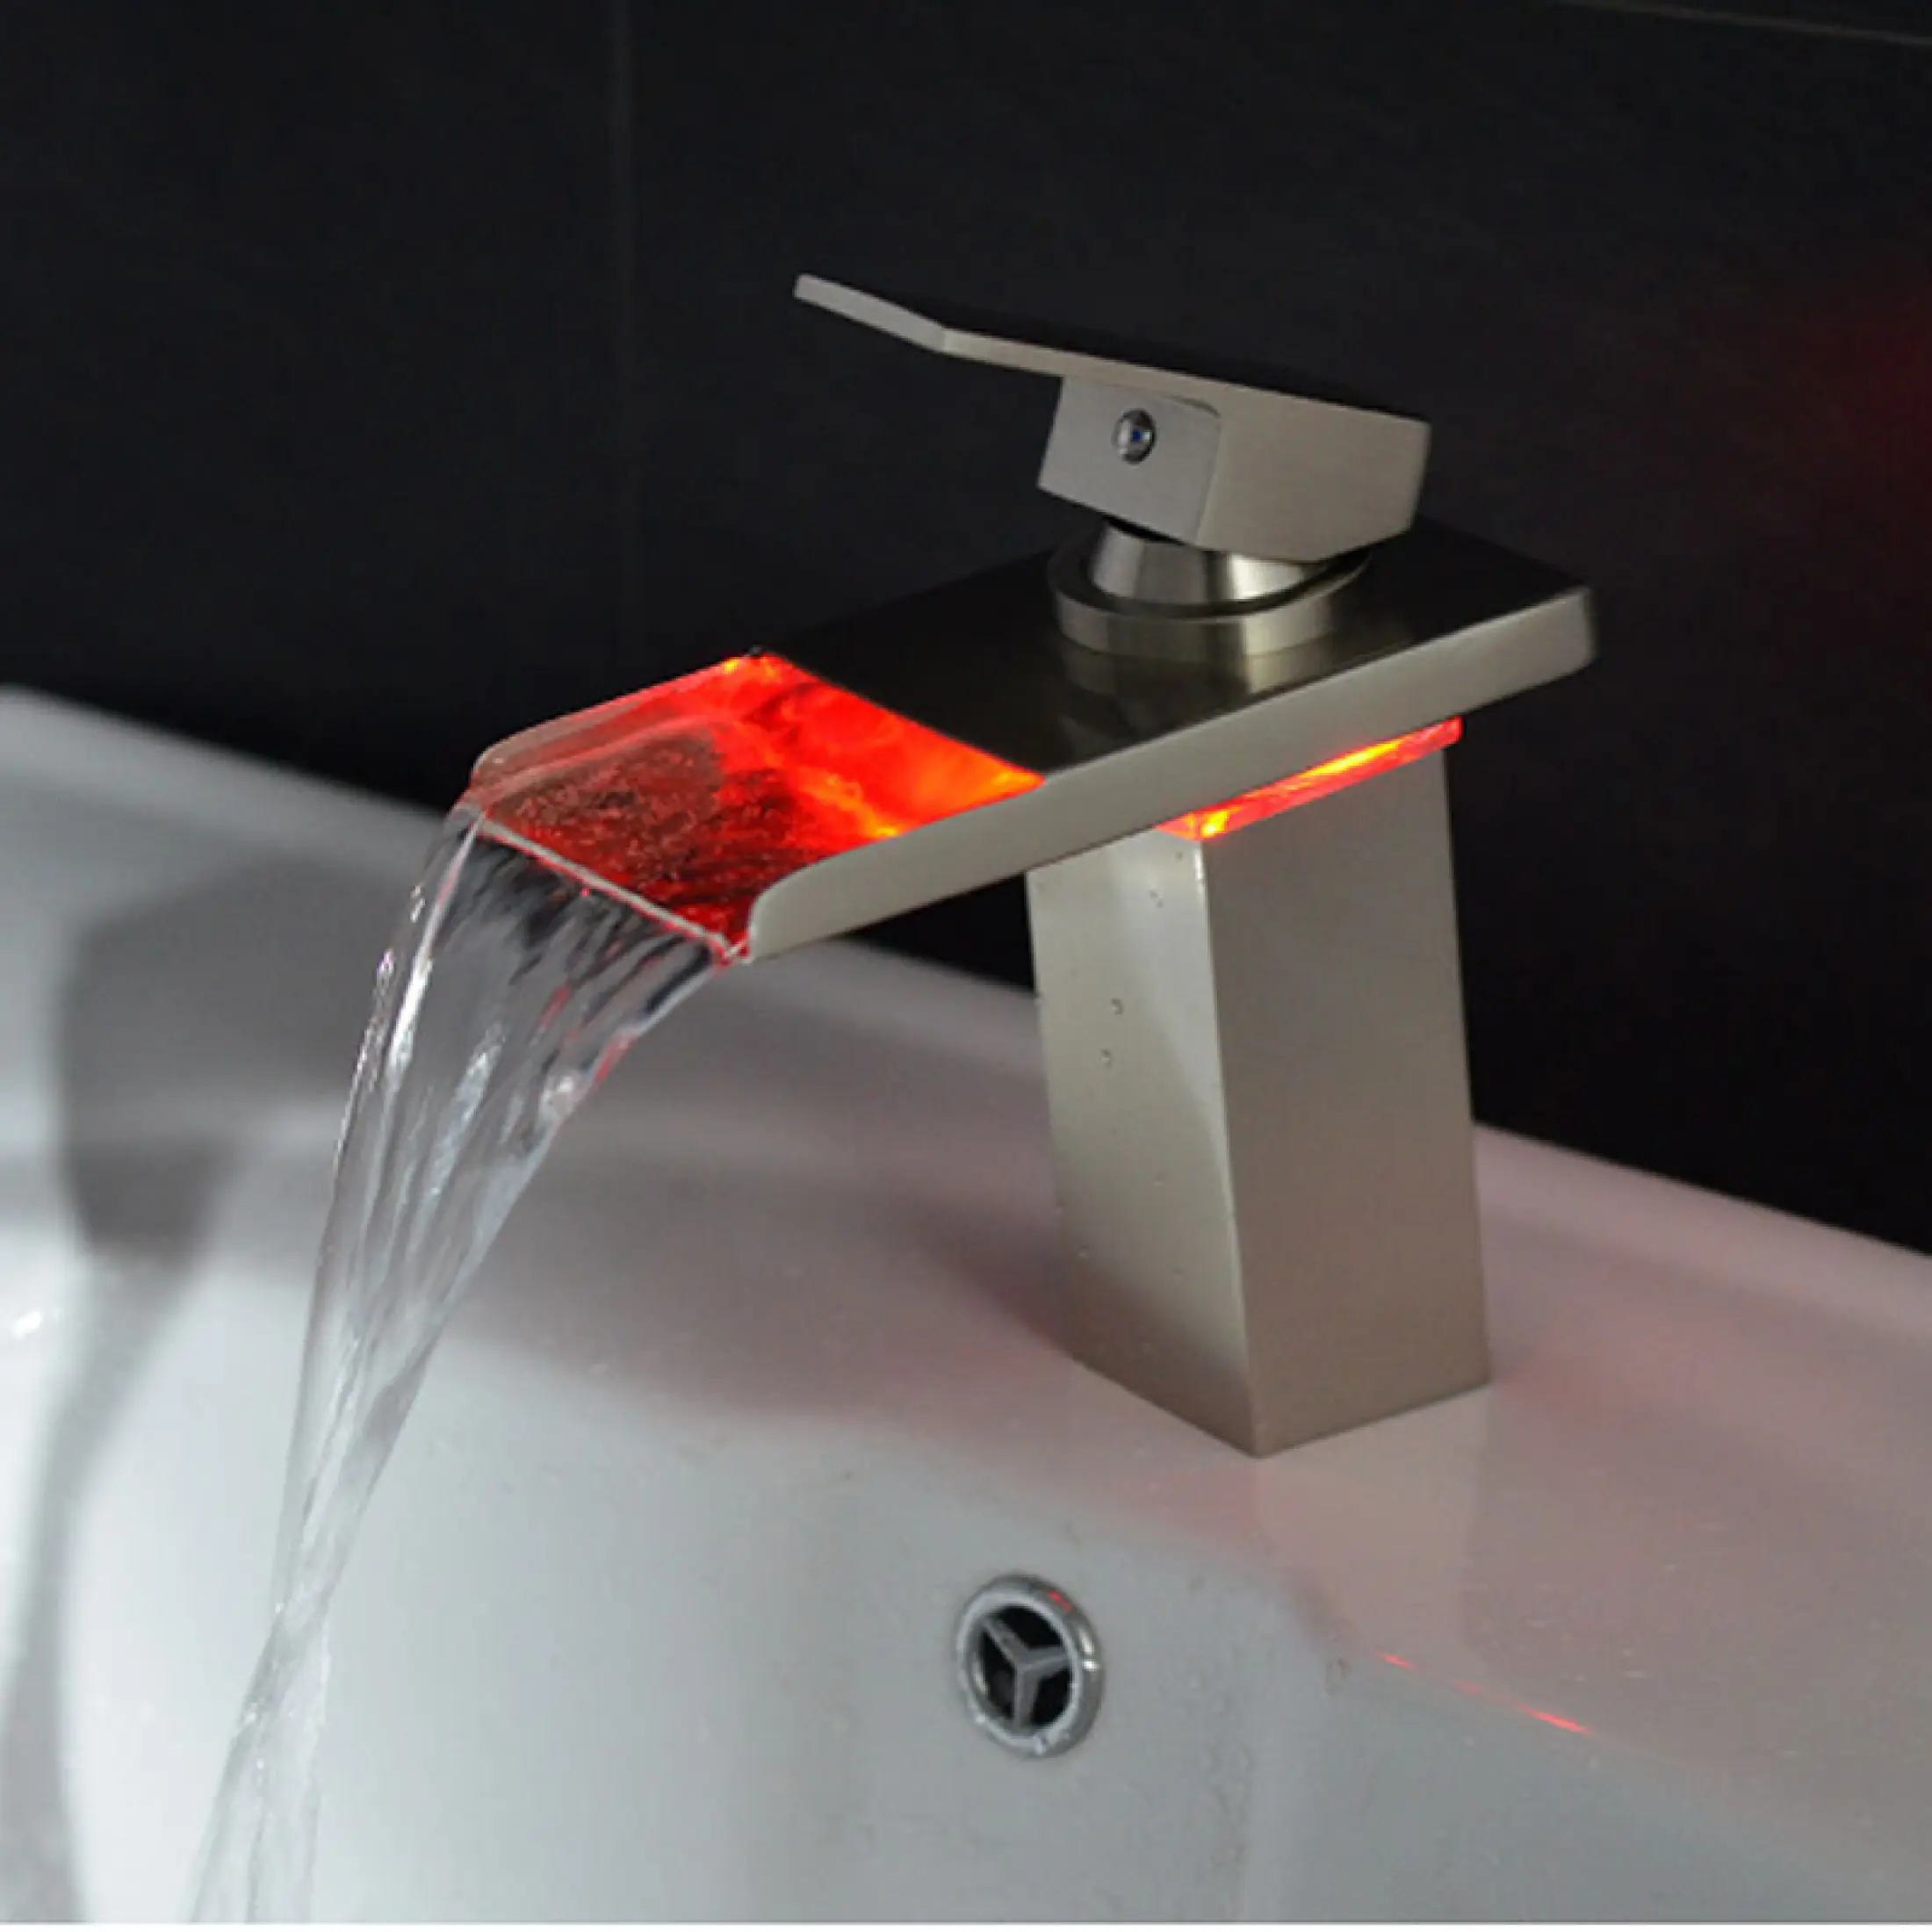 XHJTD Bathroom Basin Led Faucet Waterfall Copper Hot and Cold Water Single Hole Square Sink Outlet Washbasin Faucet 